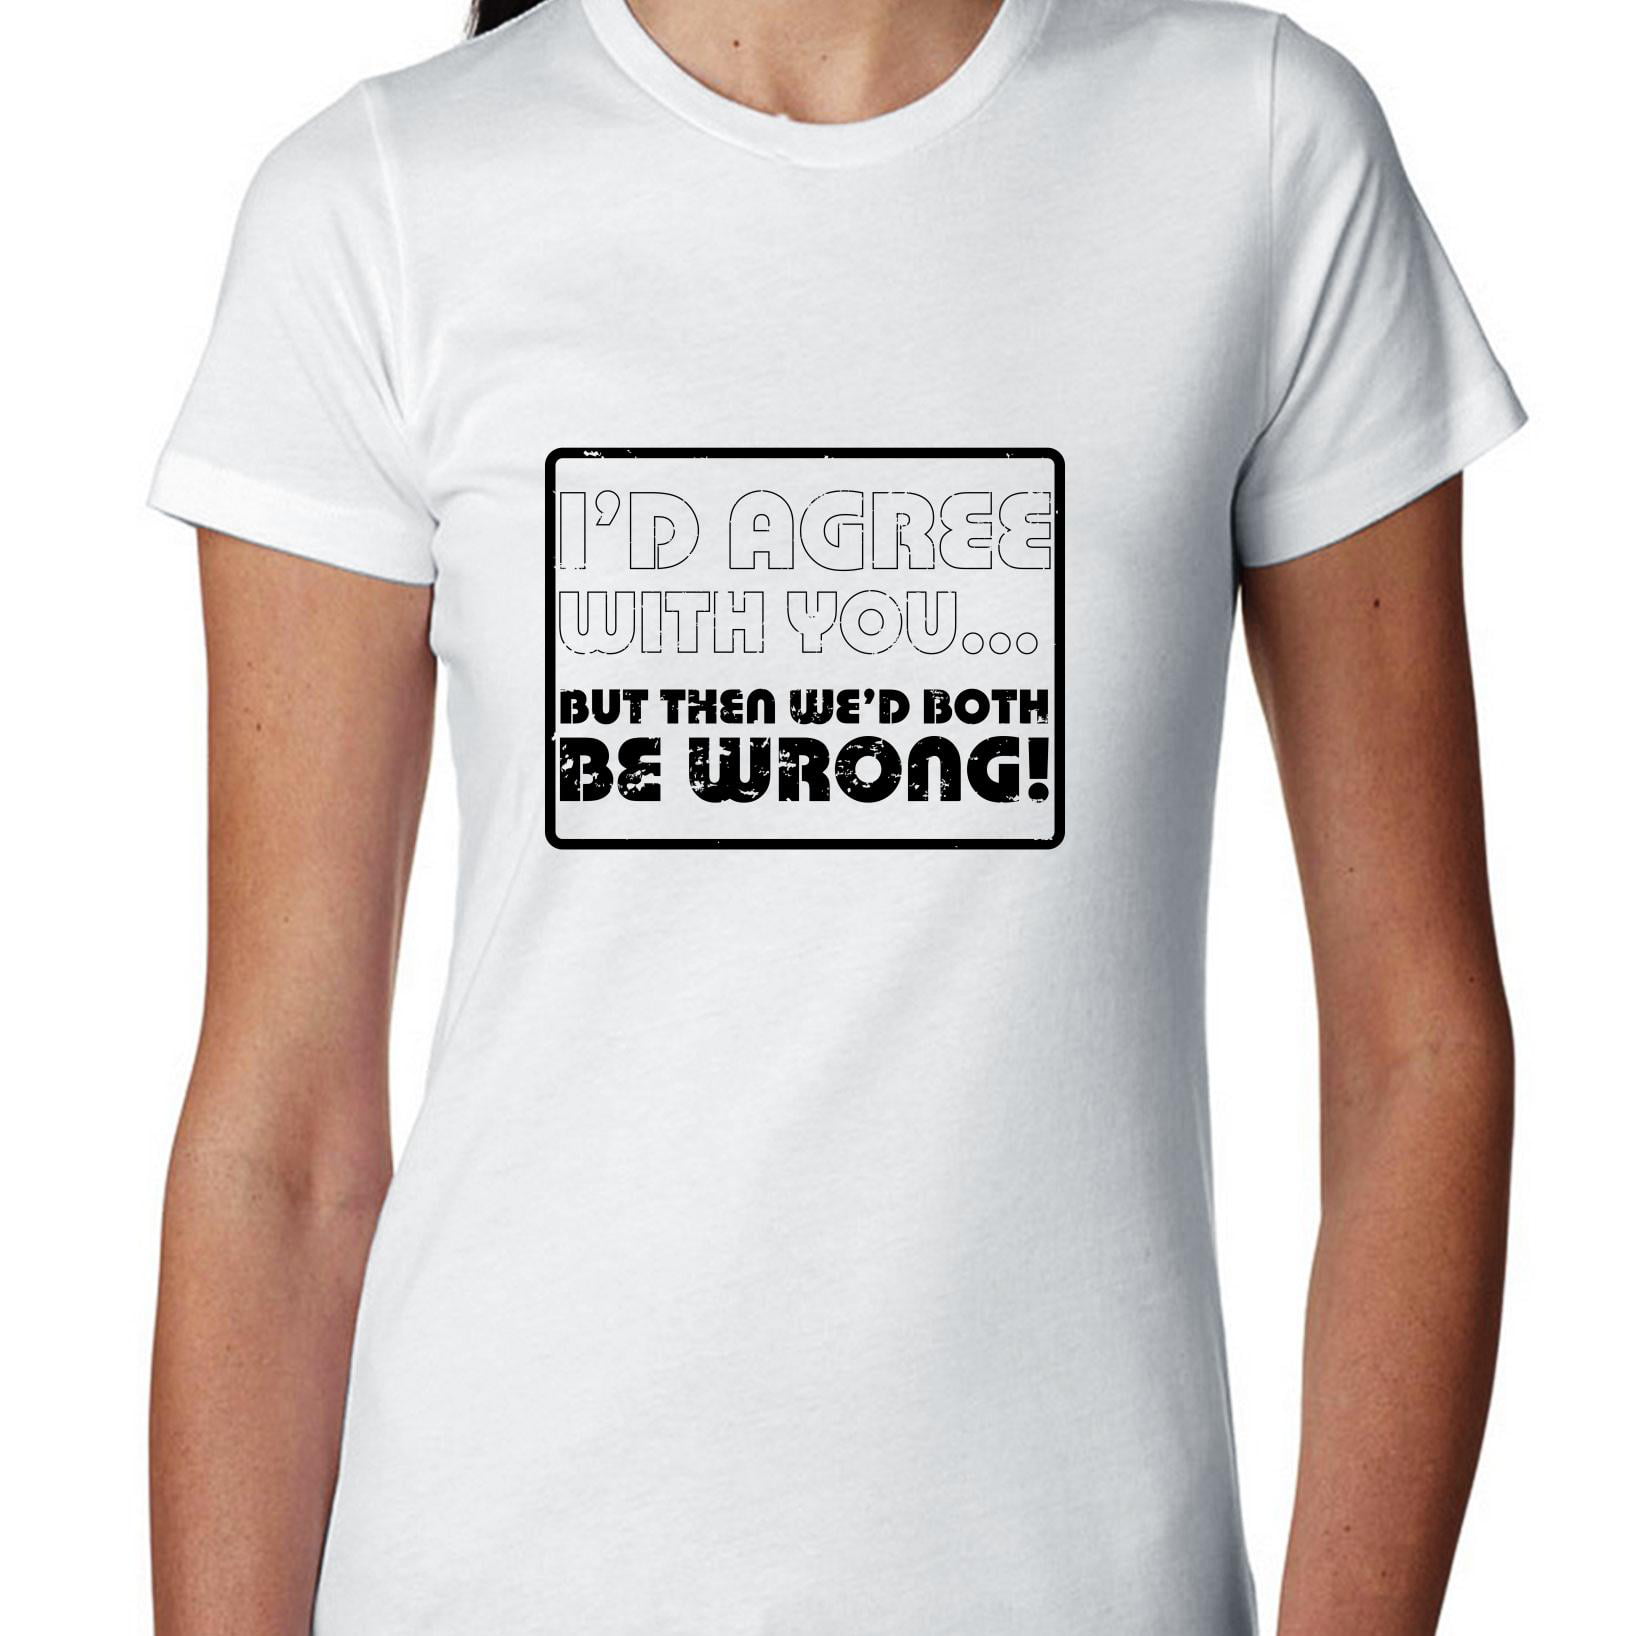 I'd Agree With You But Then We'd Both Be Wrong Womens Tee Shirt Pick Size Color